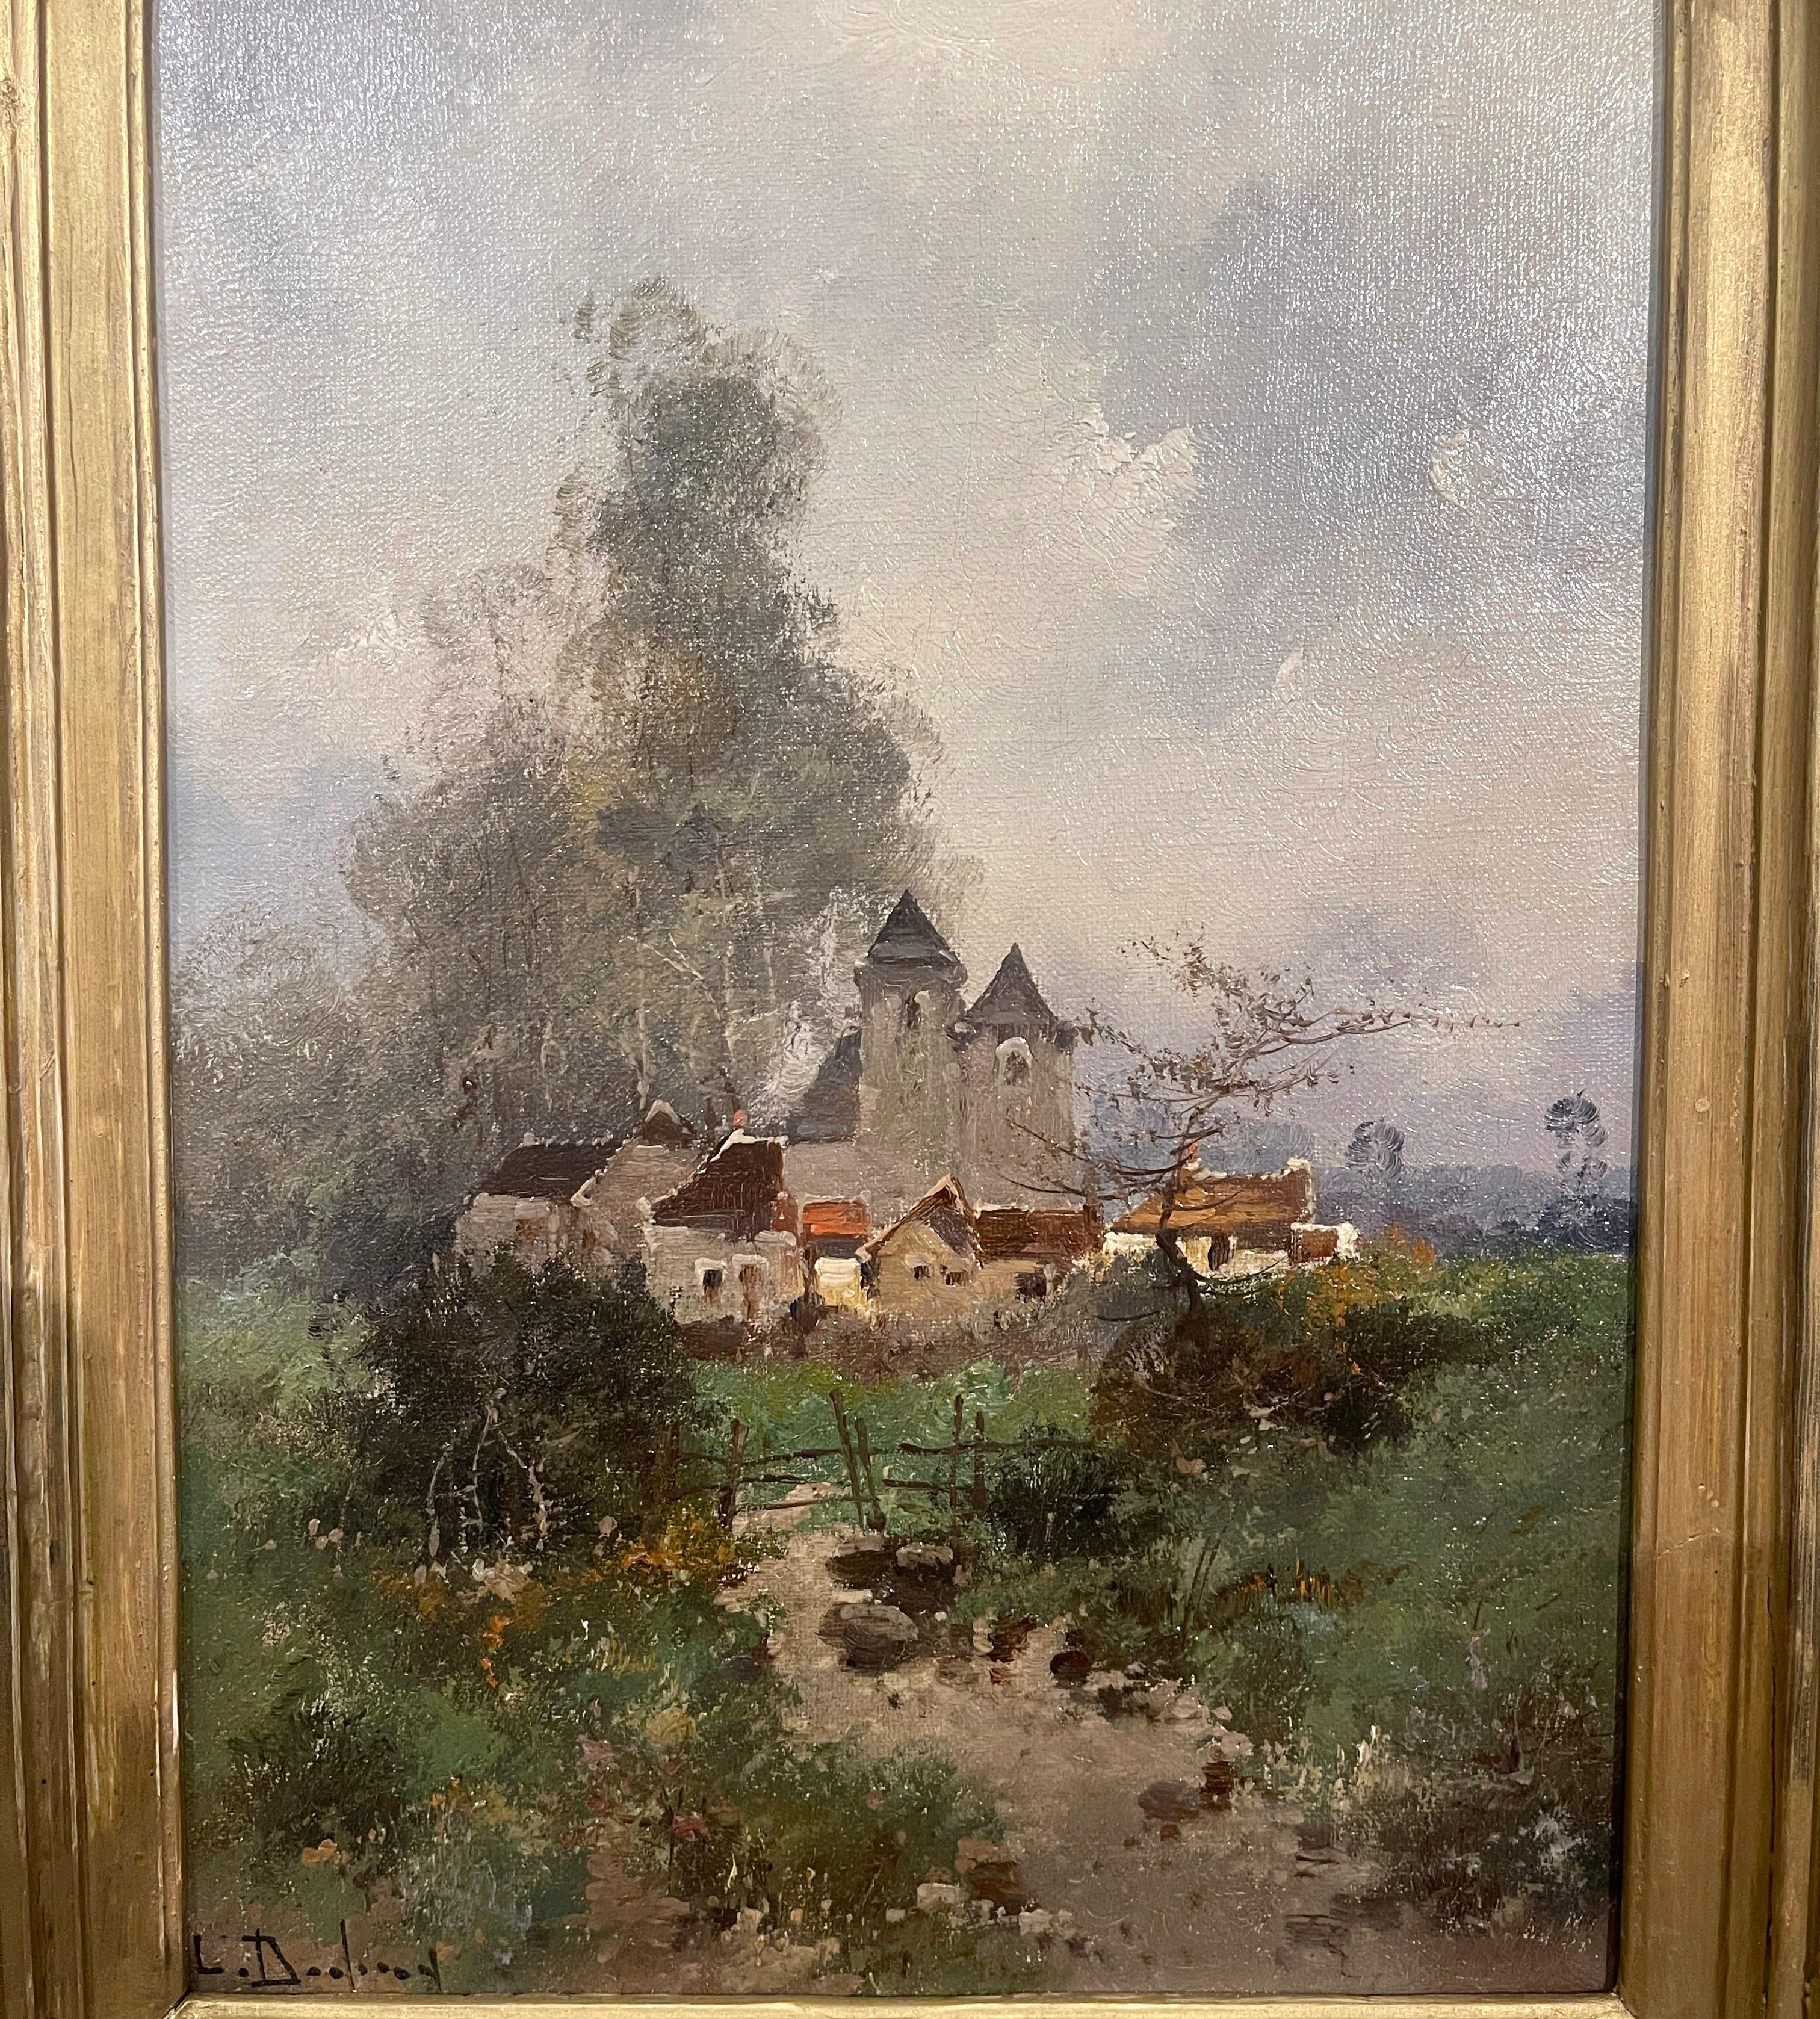  19th Century Landscapes Paintings Signed Dupuy for E. Galien-Laloue, Set of Two For Sale 2